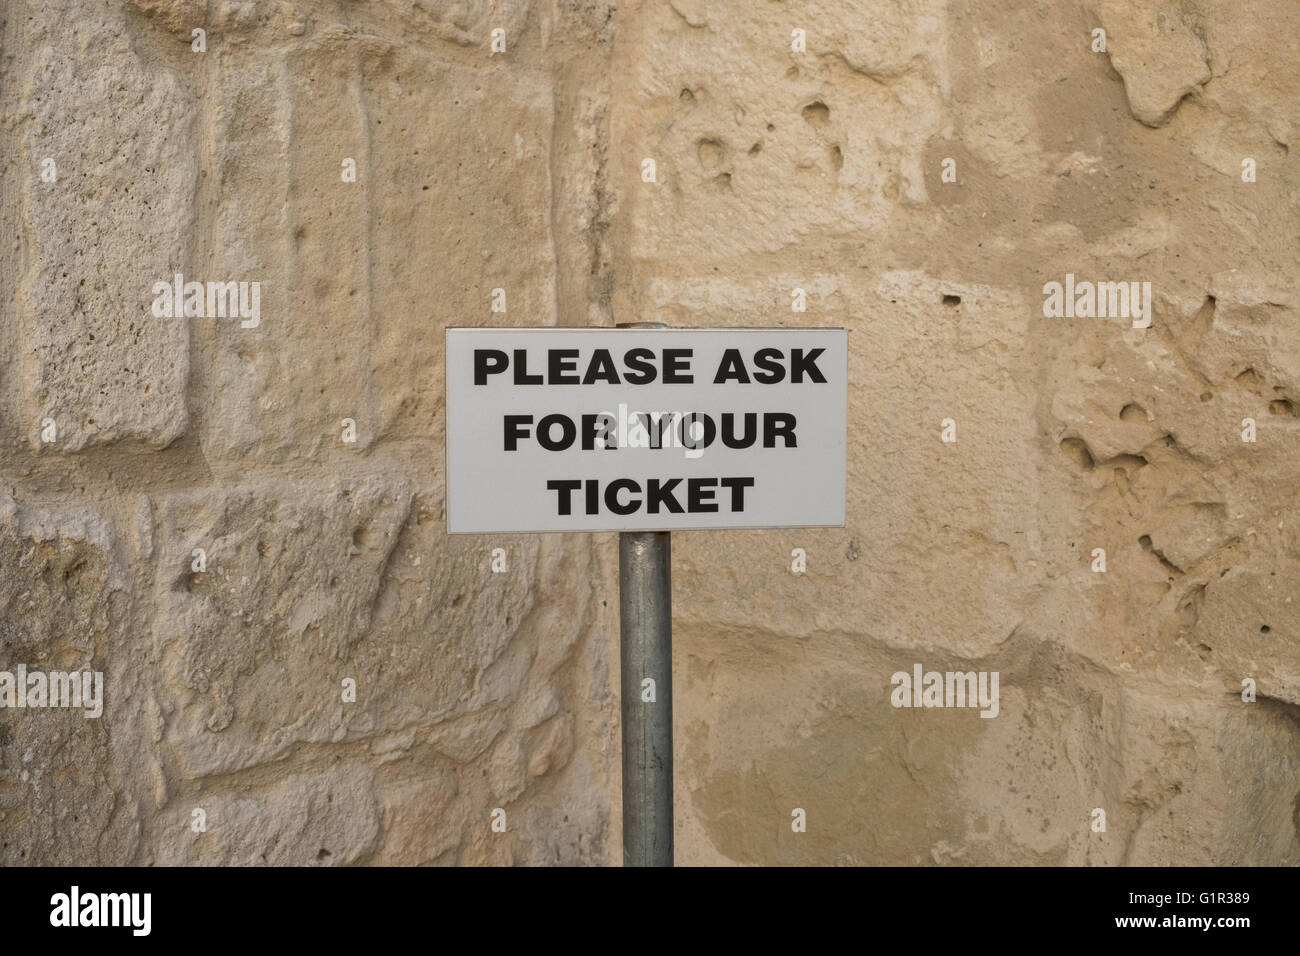 Please ask for your ticket. Stock Photo